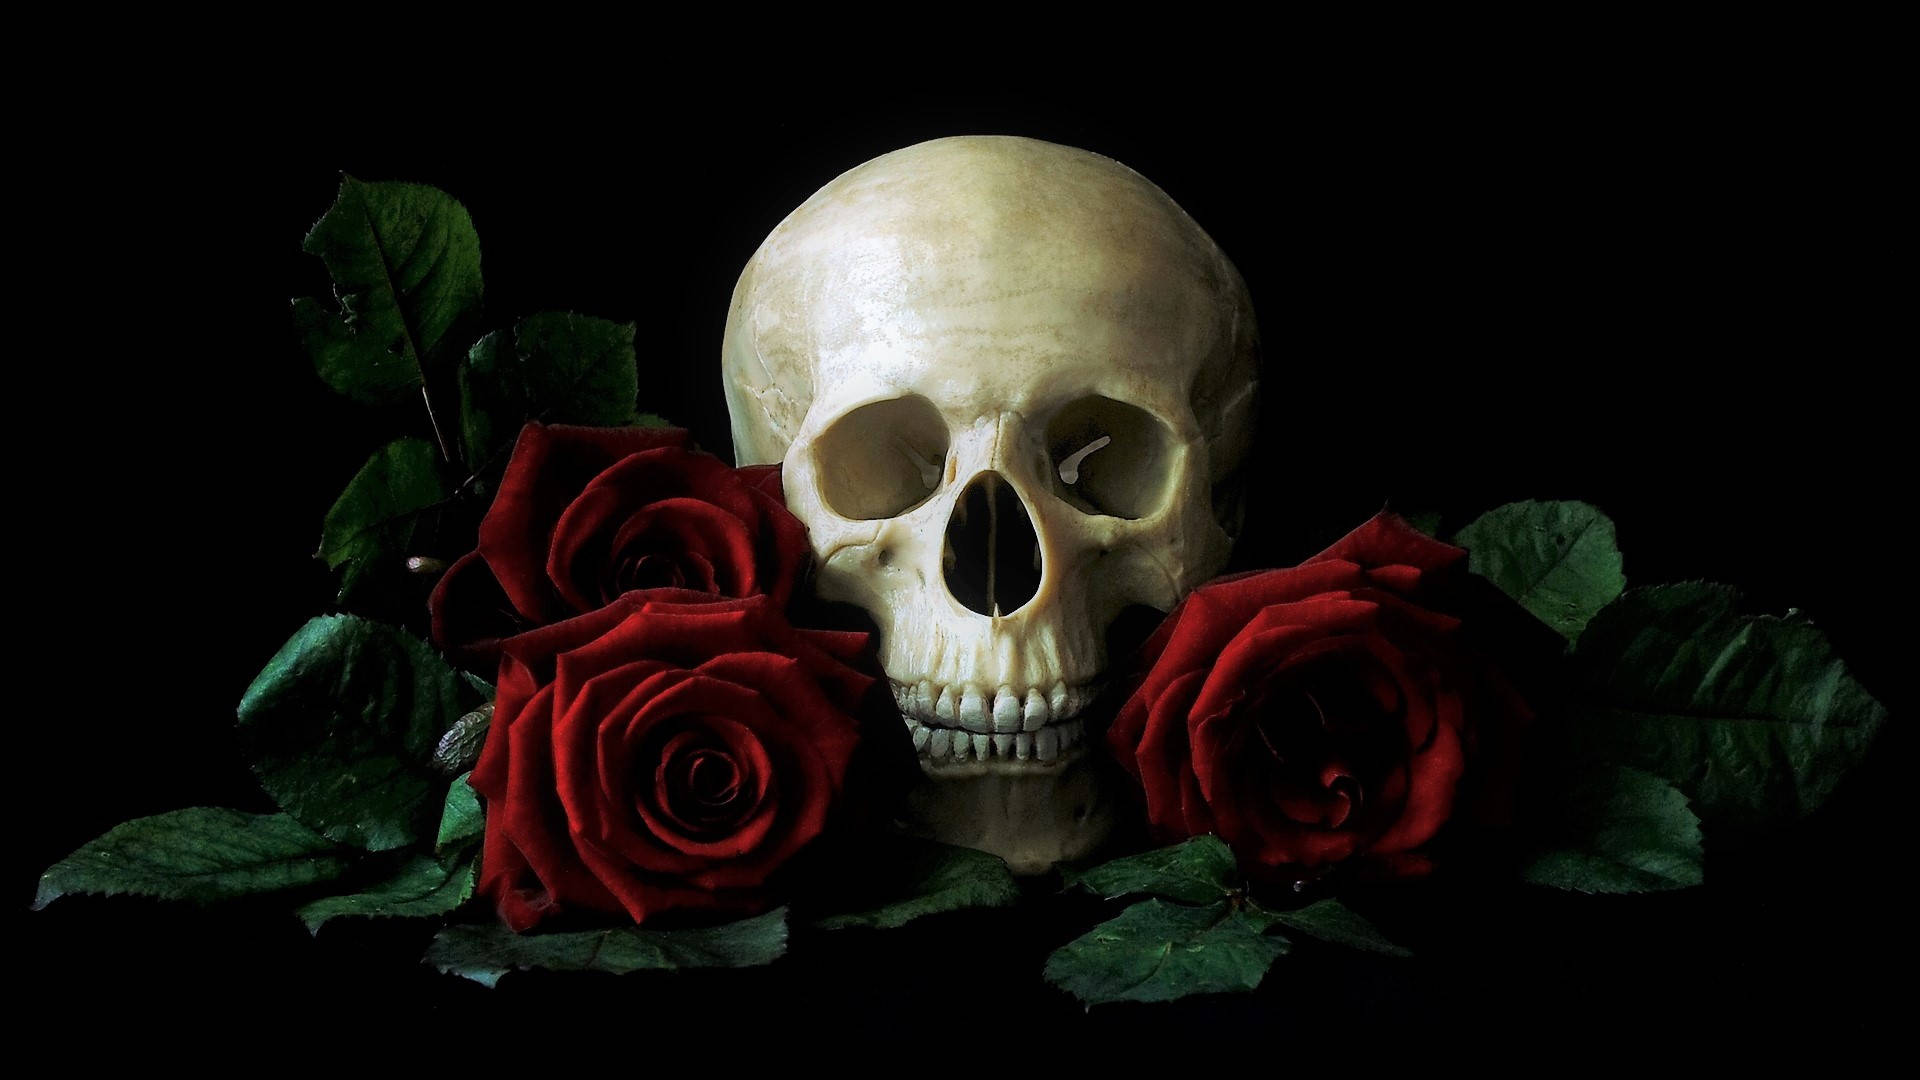 Hd Skull With Red Roses